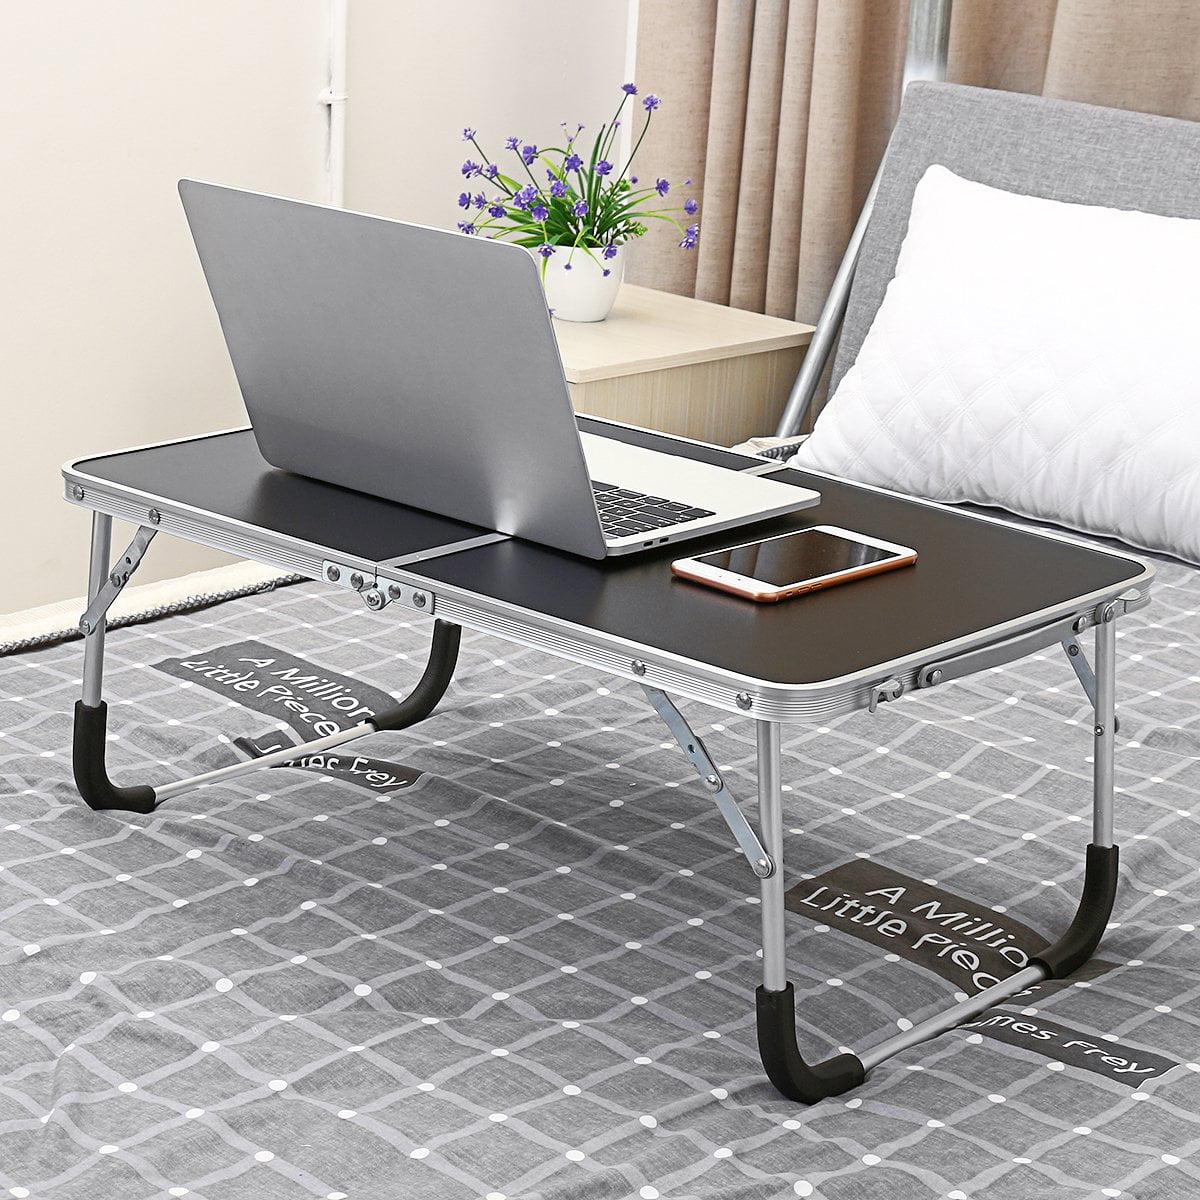 Black Reading Book Laptop Desk Watching Movie on Bed/Couch/Sofa Large Portable Laptop Bed Tray Table Notebook Stand Reading Holder with Foldable Legs for Eating Breakfast 